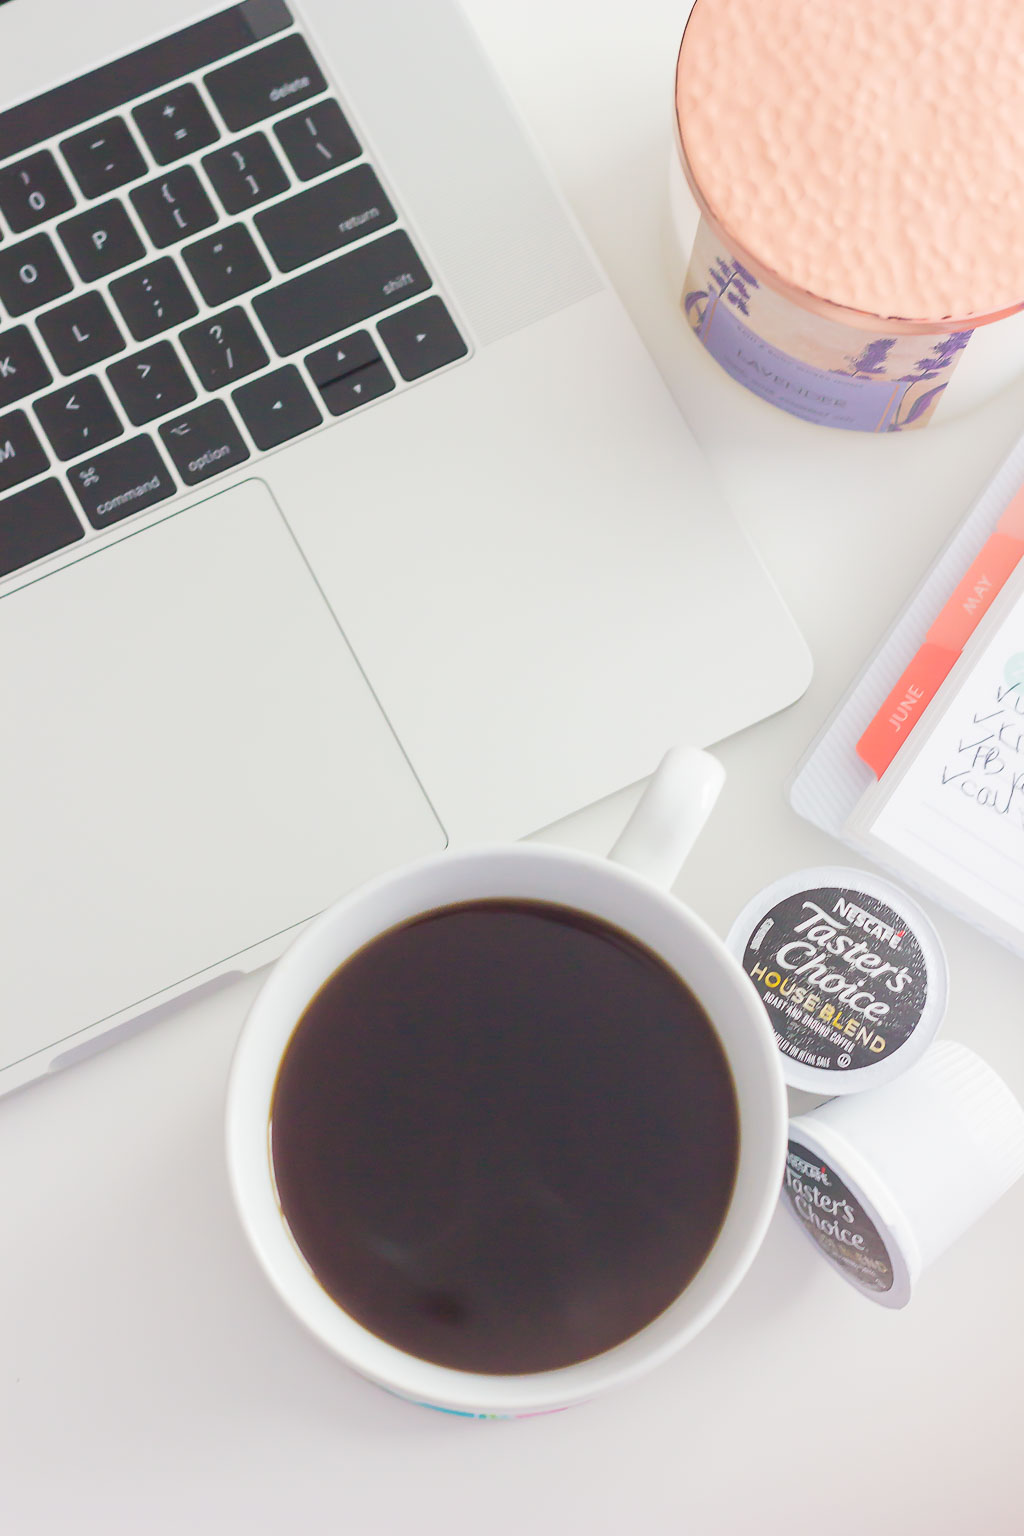 My weekday morning routine starts with a little work and a hot cup of coffee. It's what I need to get me going and give me some time to savor the start of the day.